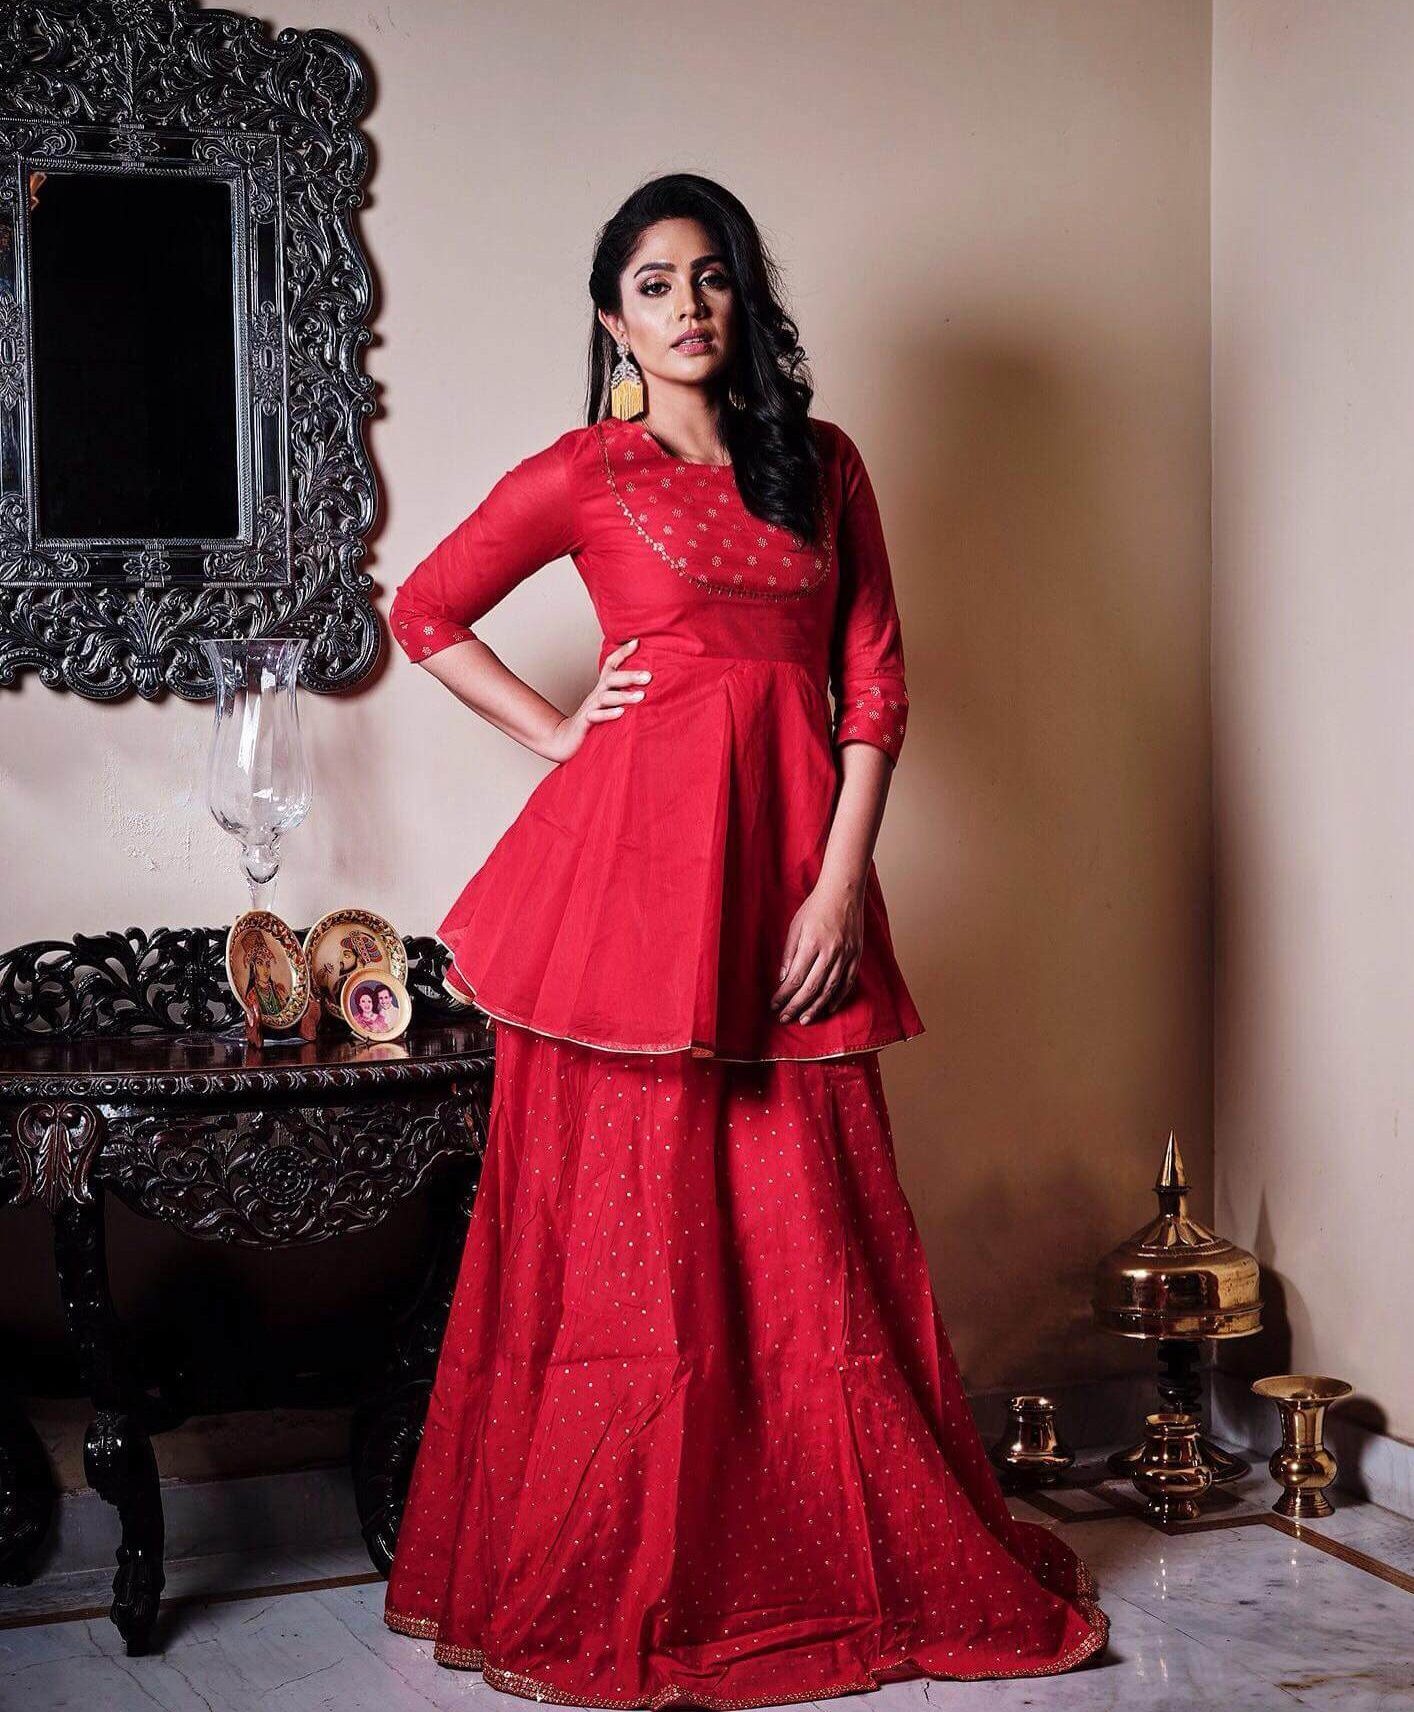 Mumtaz Sorcar Festive Ready Look In Red Fit & Flare Kurta With  Long Red Skirt